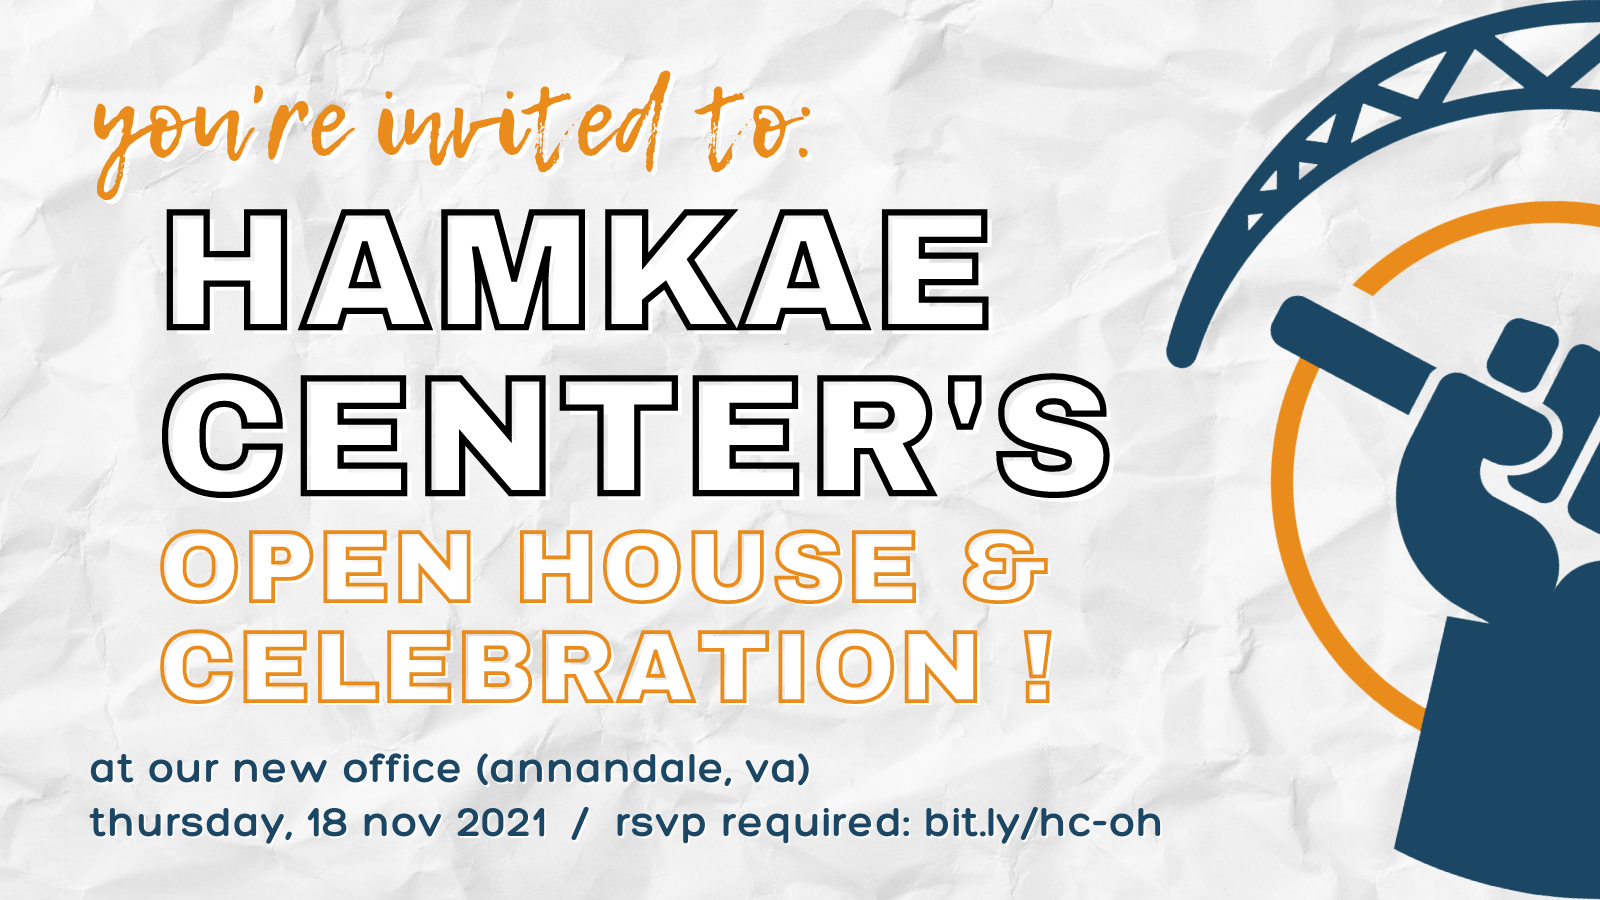 you're invited to: Hamkae Center's Open House & Celebration! at our new office (Annandale, VA). Thursday, 18 Nov 2021. RSVP required: bit.ly/hc-oh